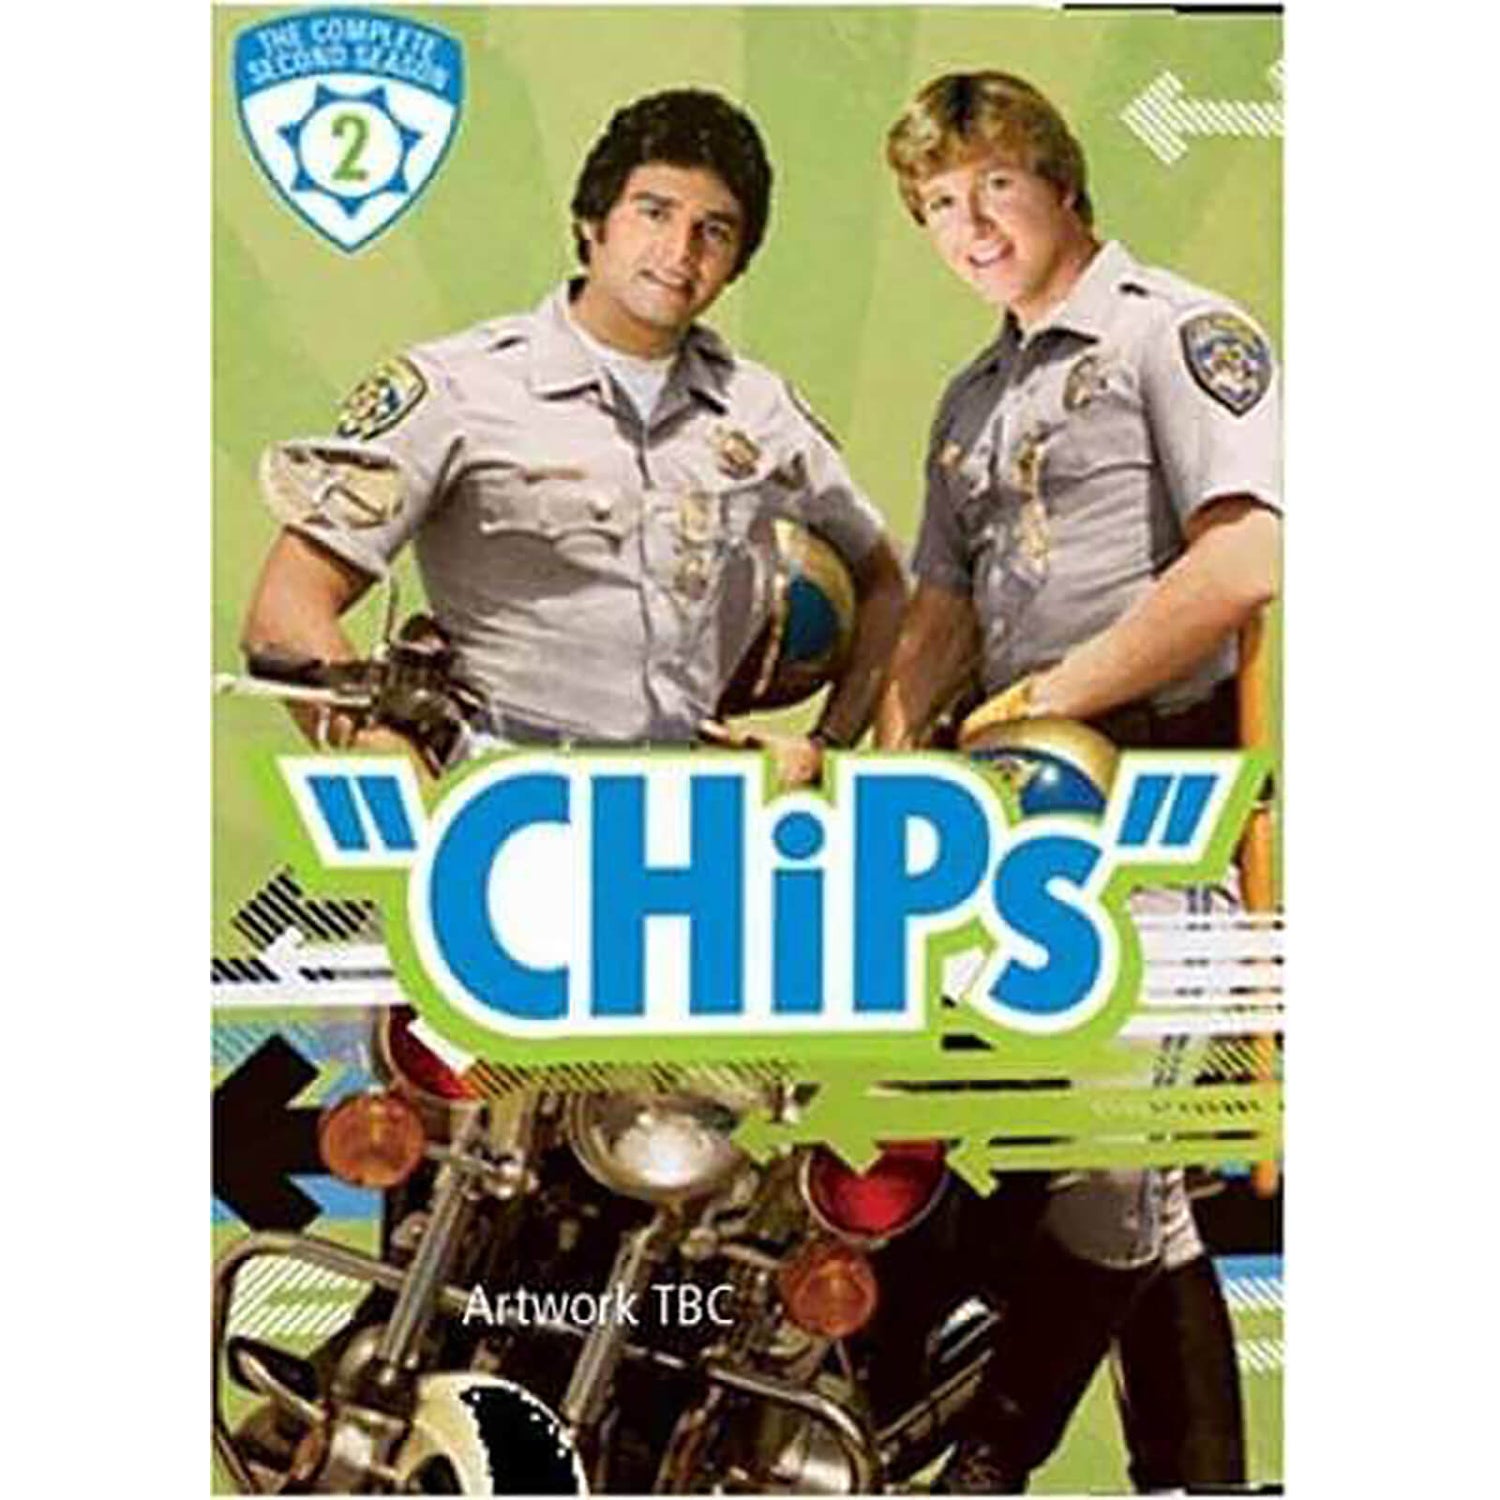 CHiPS - Complete Season 2